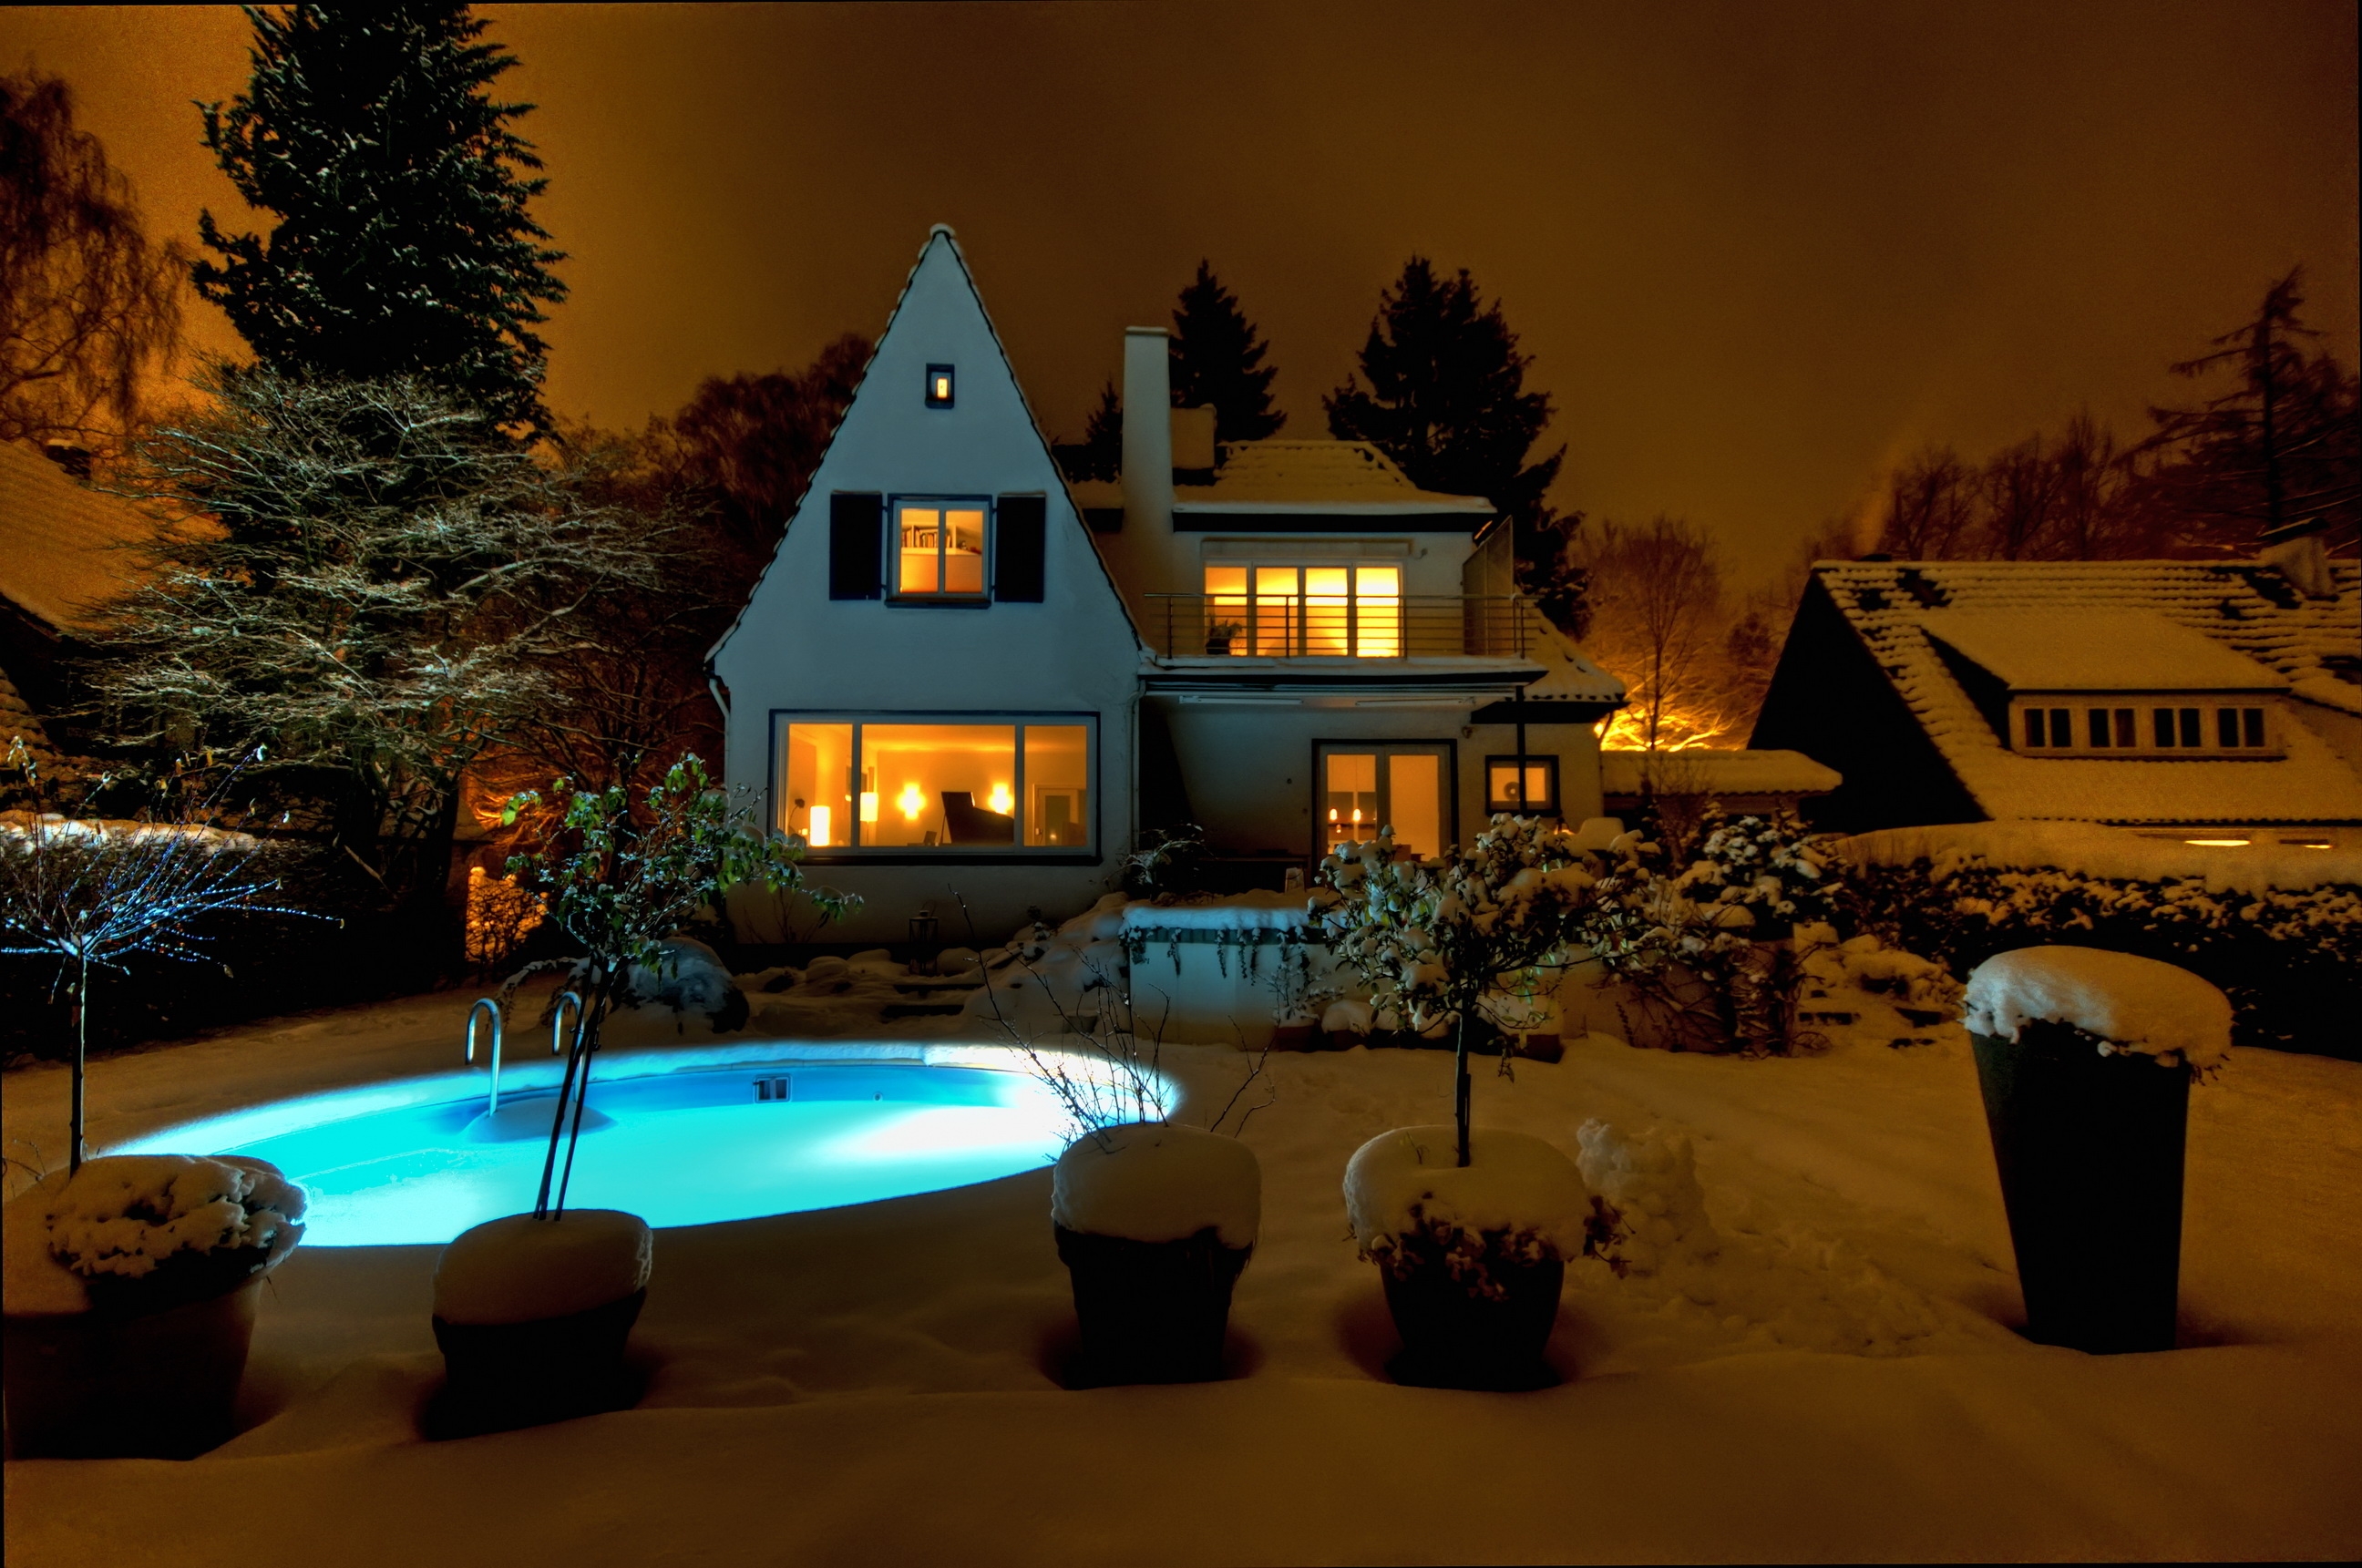 houses, cities, night, snow, mansion, pools